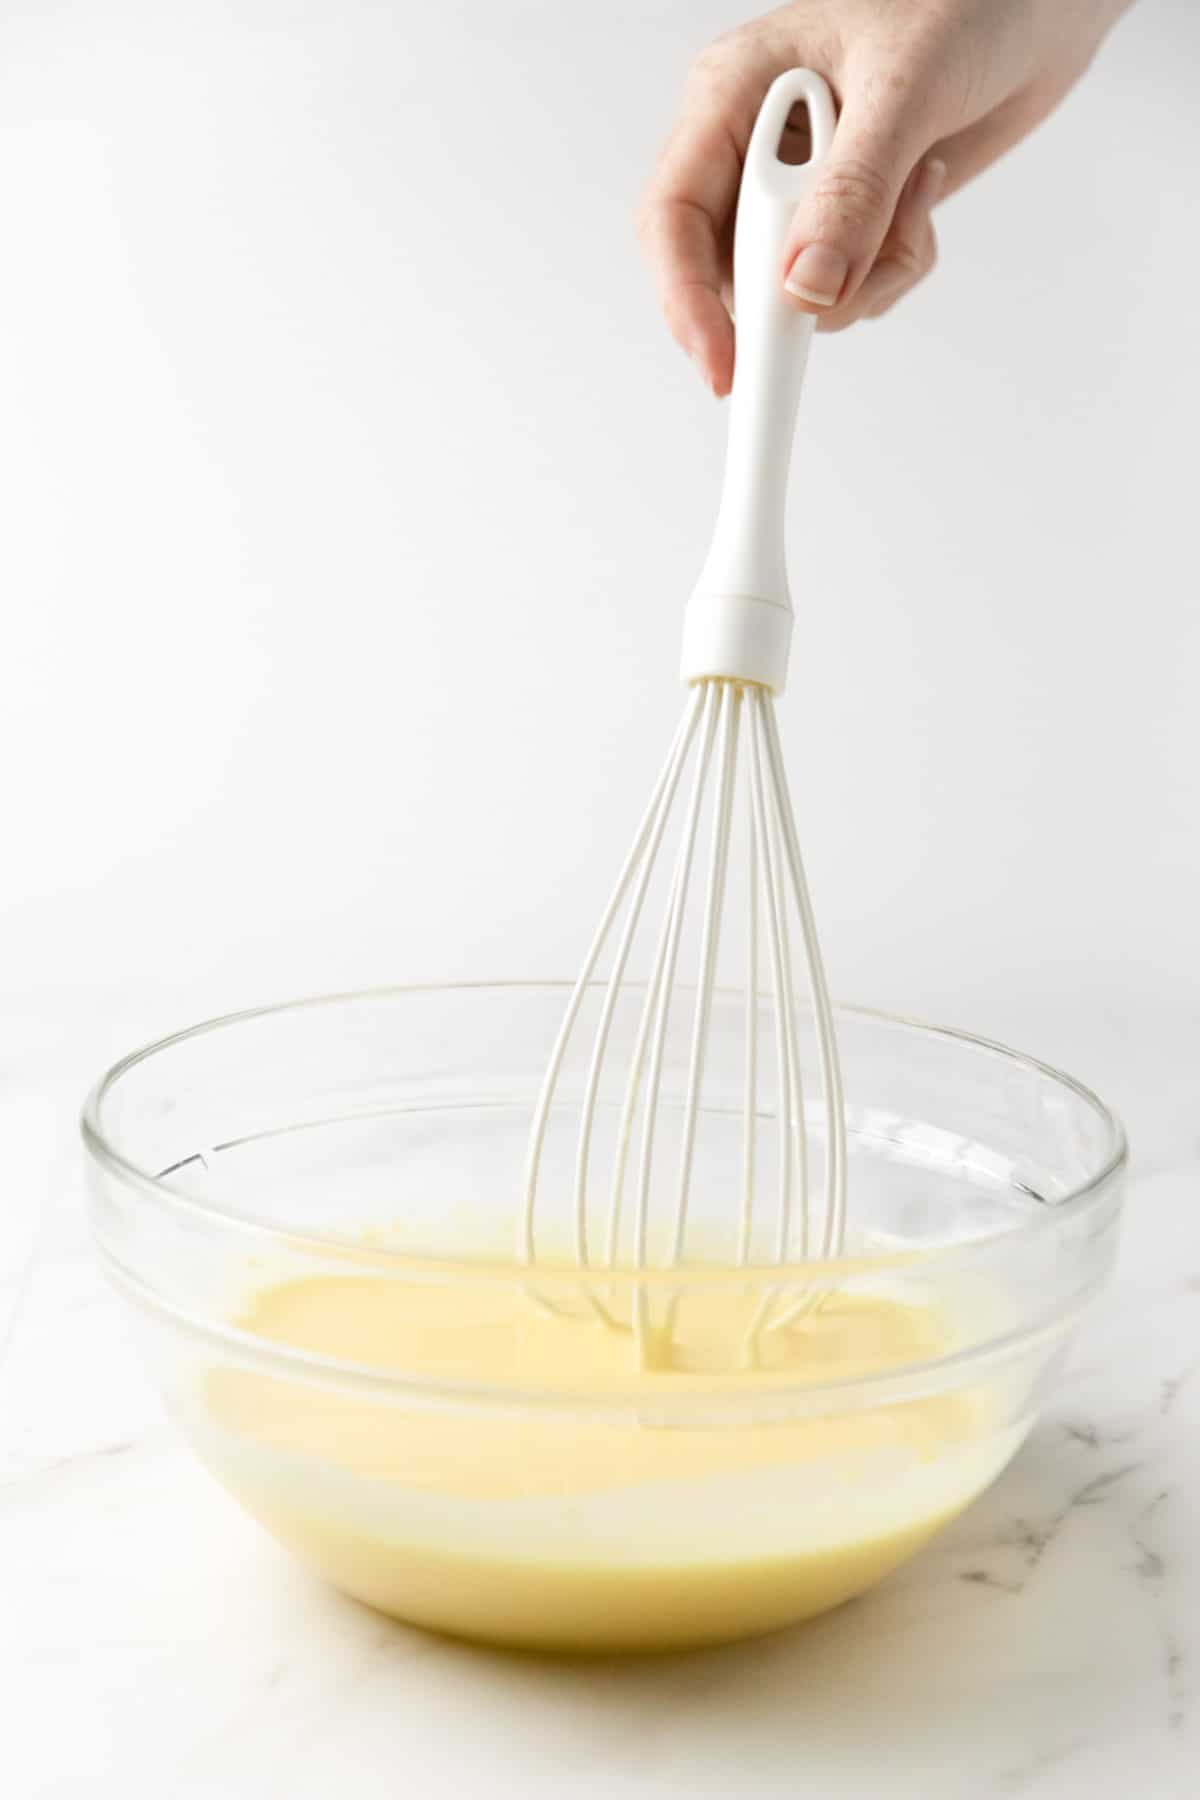 whisk held by a hand mixing vanilla pudding